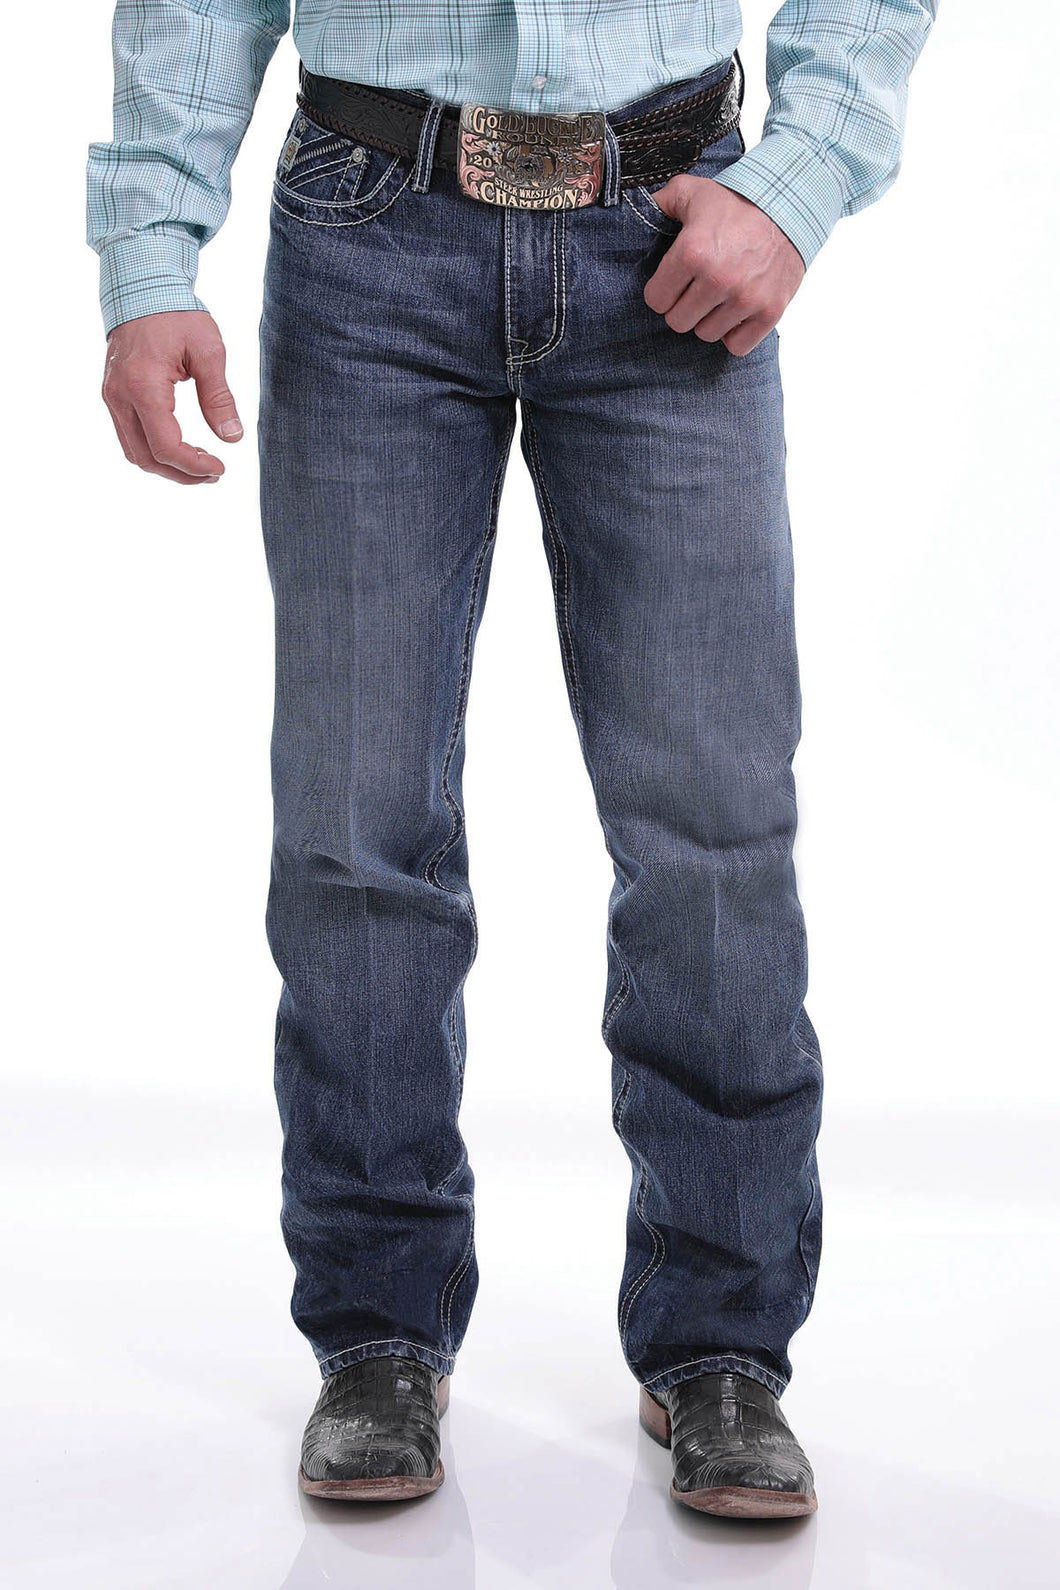 Men's Relaxed Fit Grant Jean by Cinch